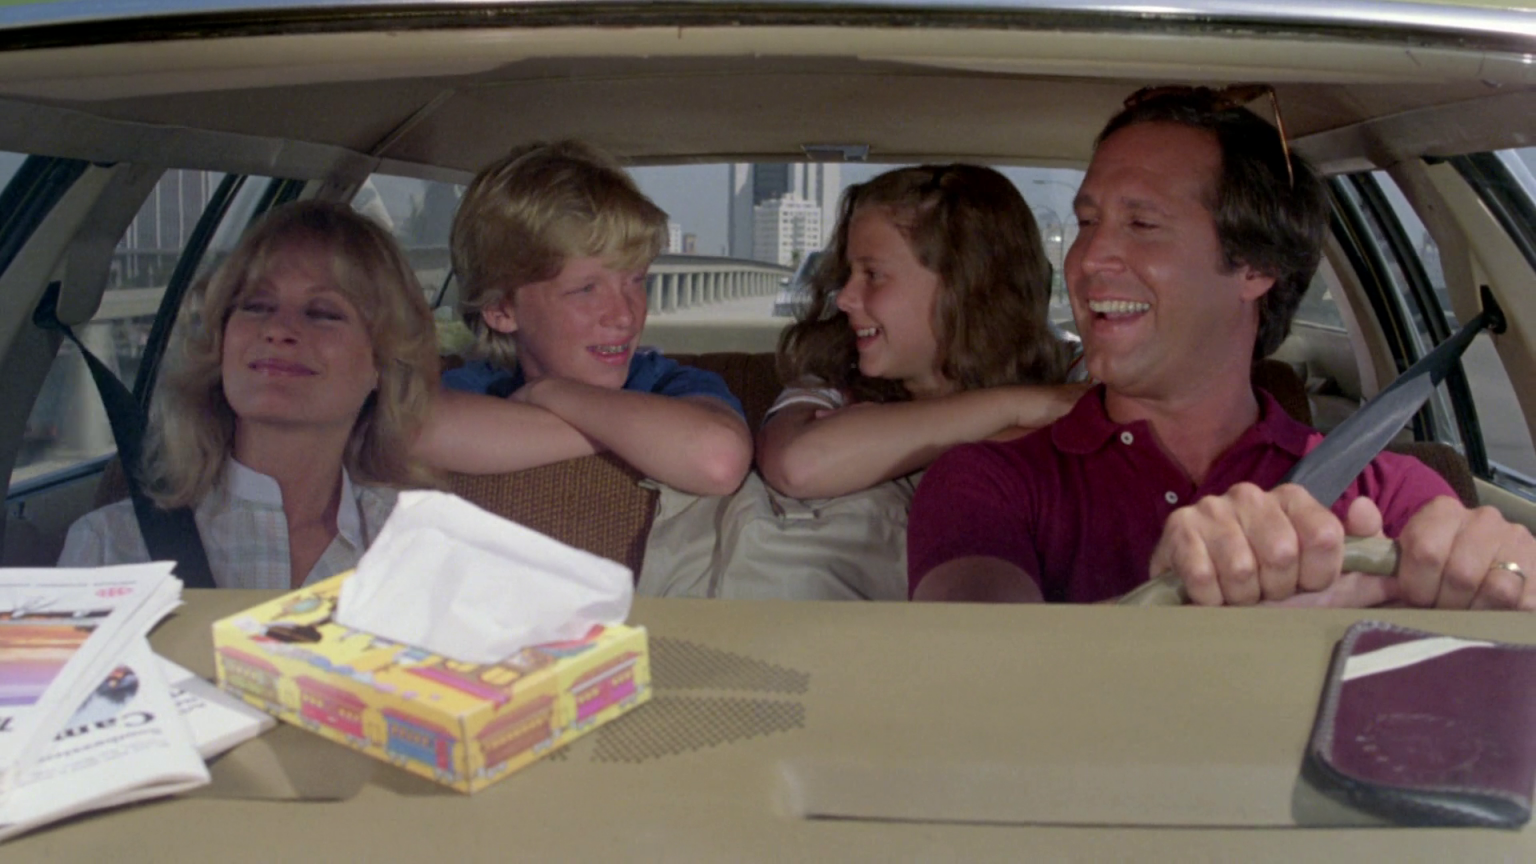 VINTAGE SUMMER: National Lampoon’s Vacation (1983) .